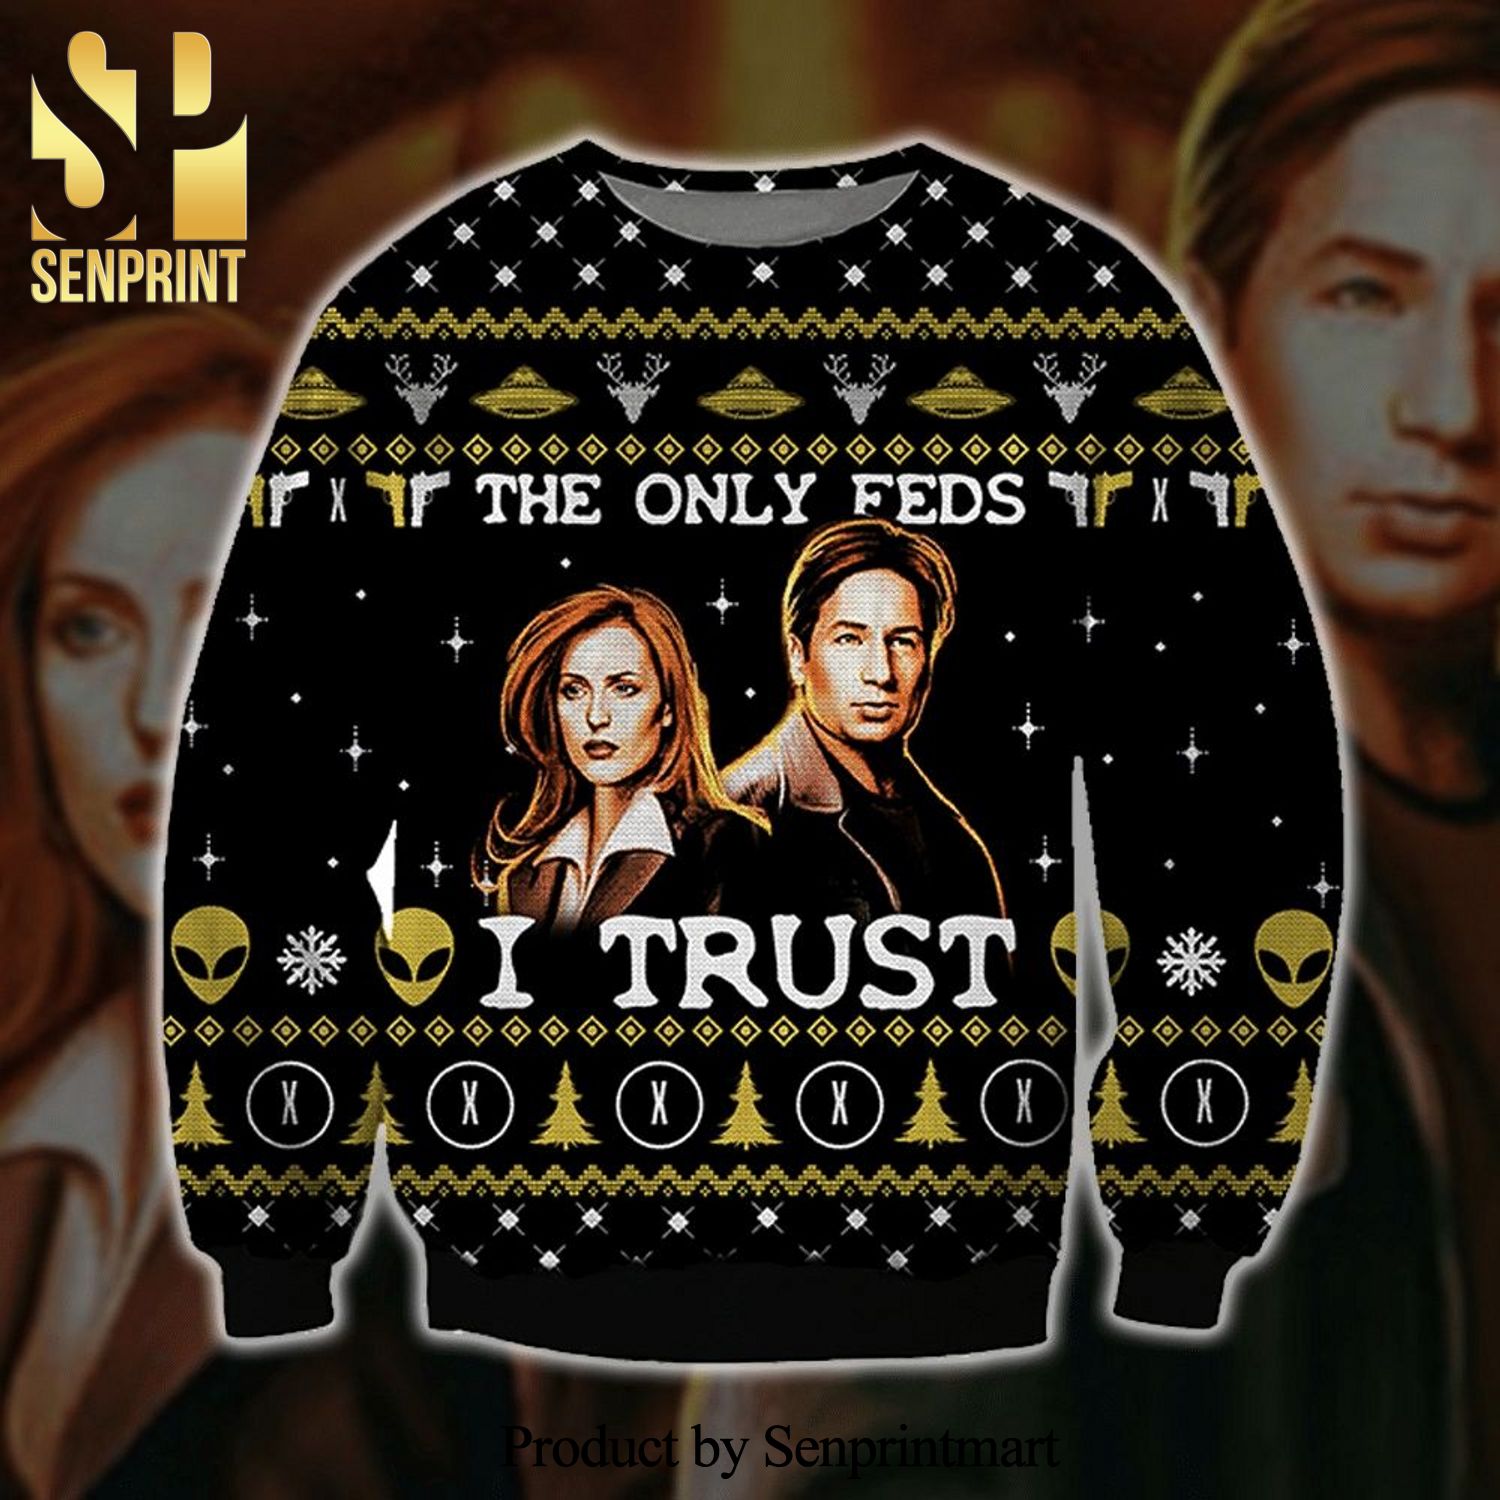 Fox Mulder And Dana Scully The X-Files The Only Feds I Trust Knitted Ugly Christmas Sweater